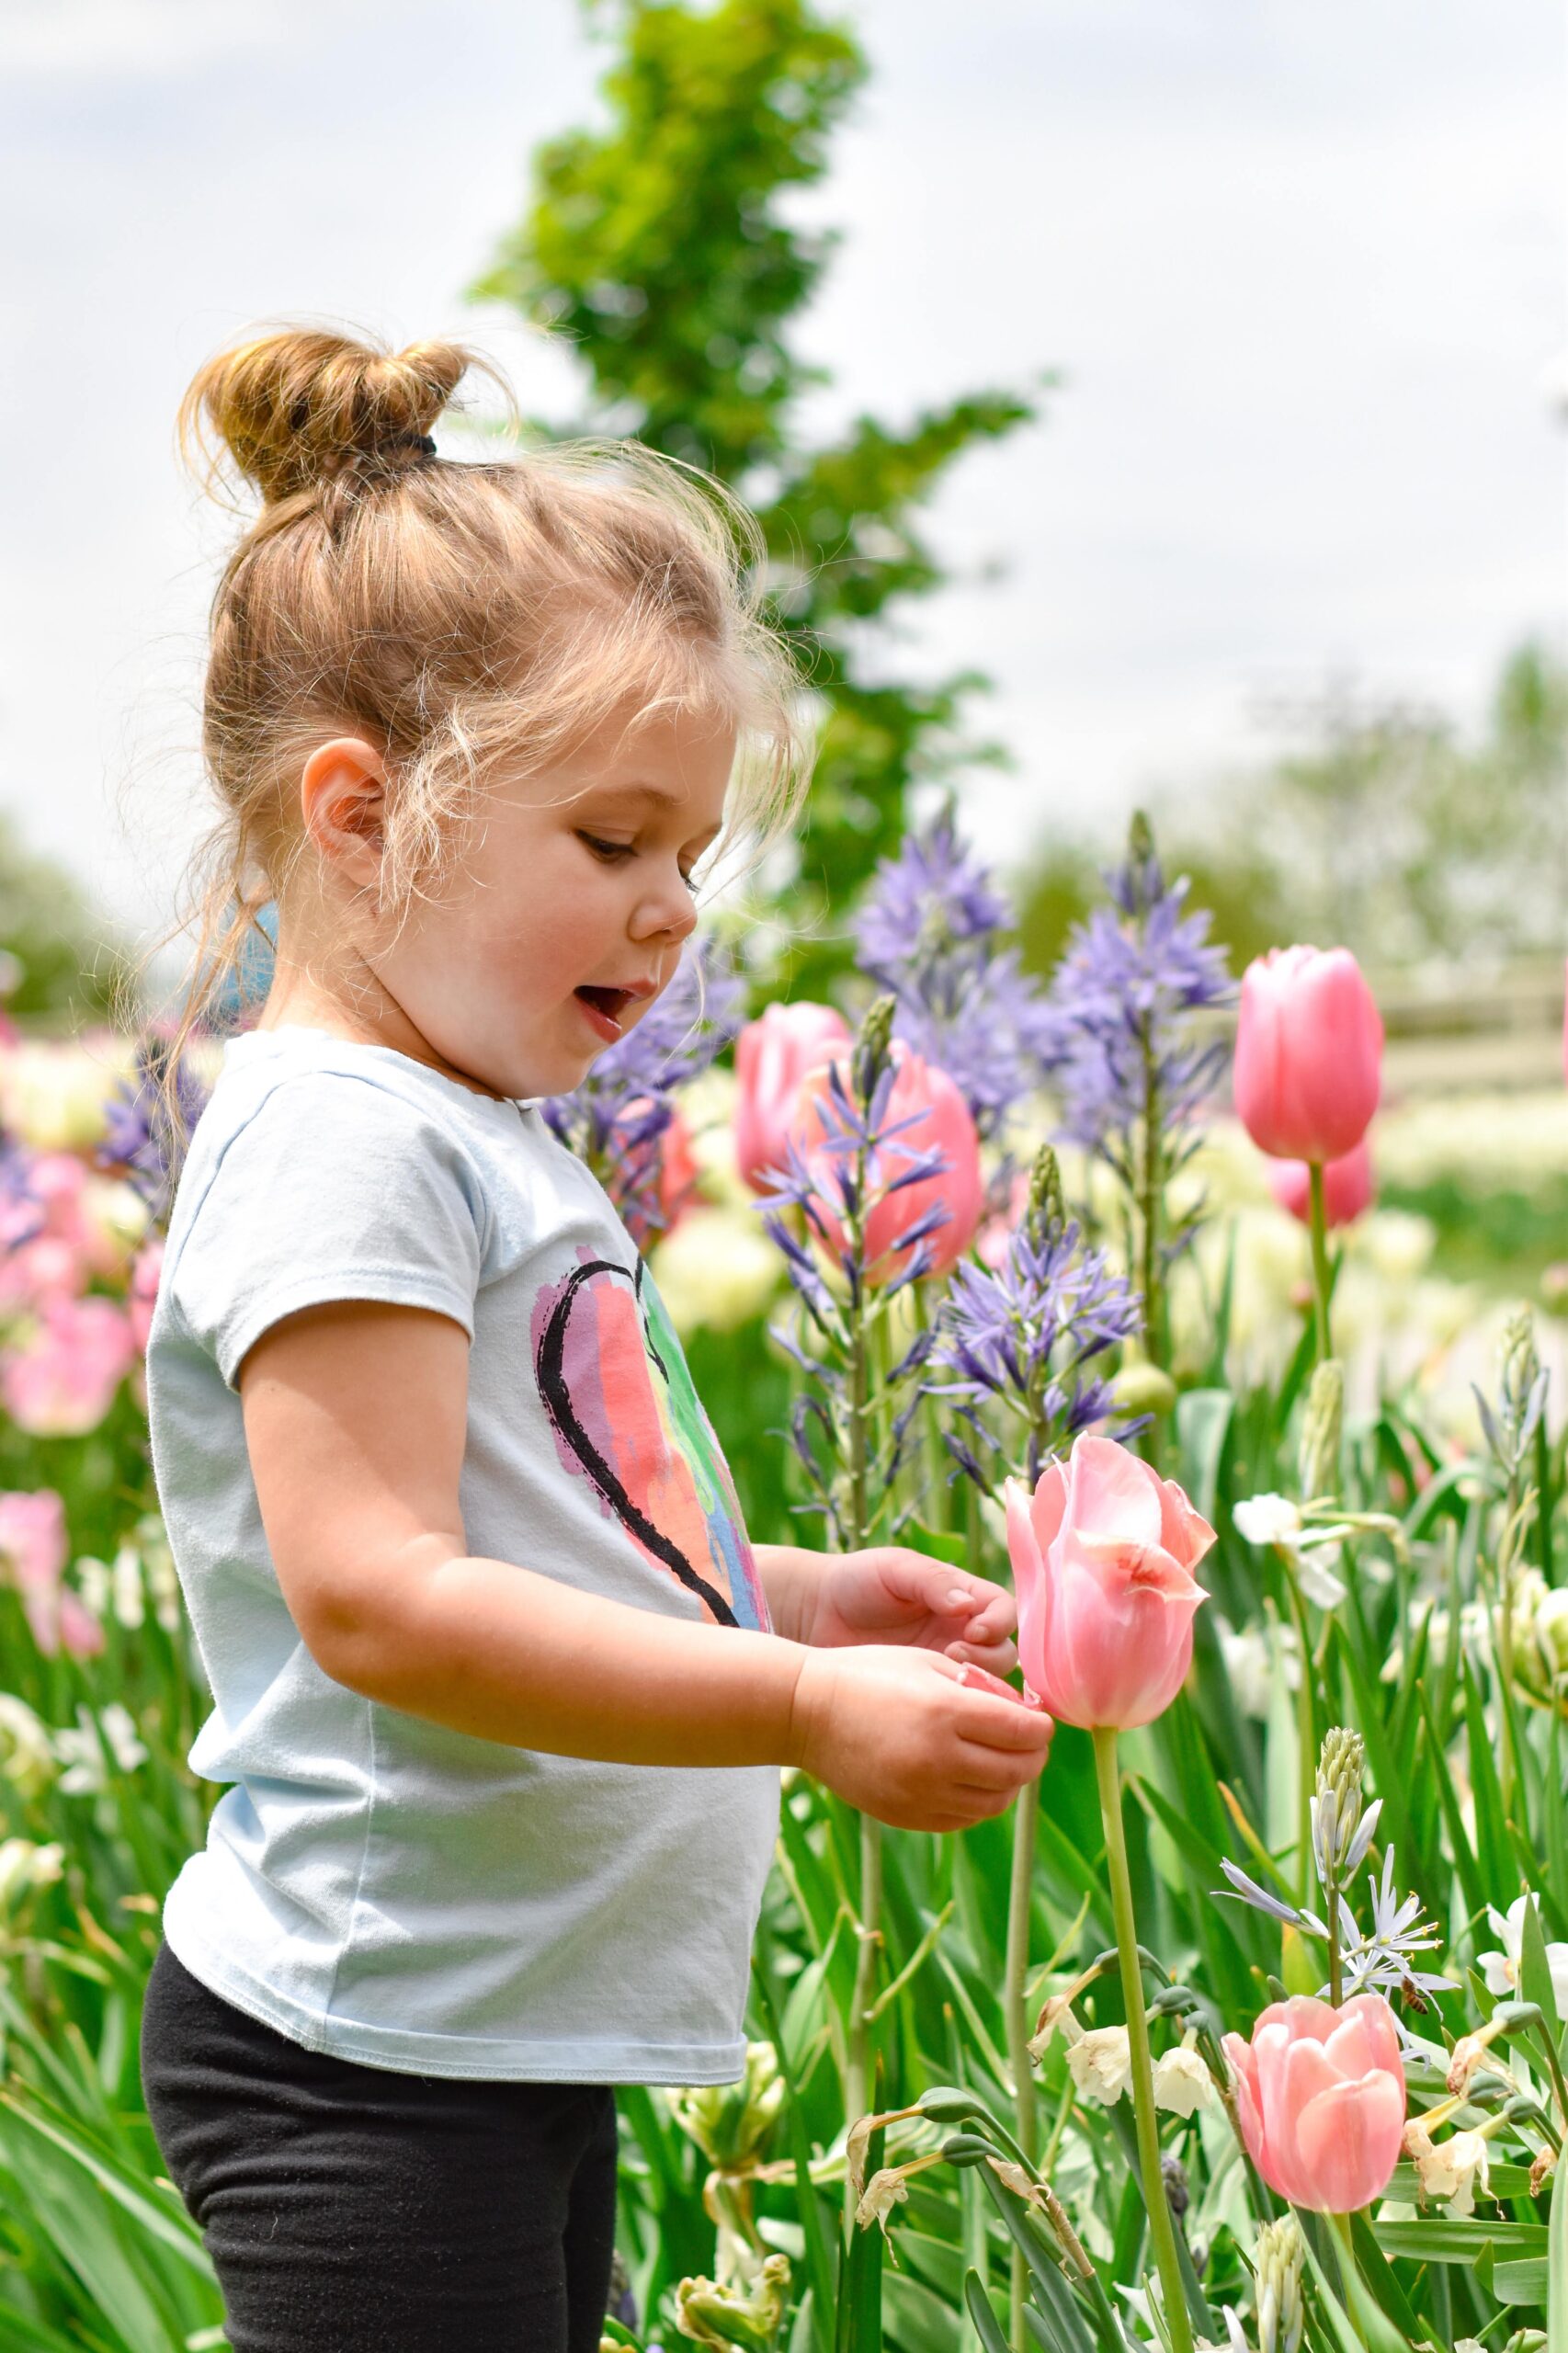 a young girl standing in a flower garden with colorful spring flowers as she reaches out to touch a pink tulip